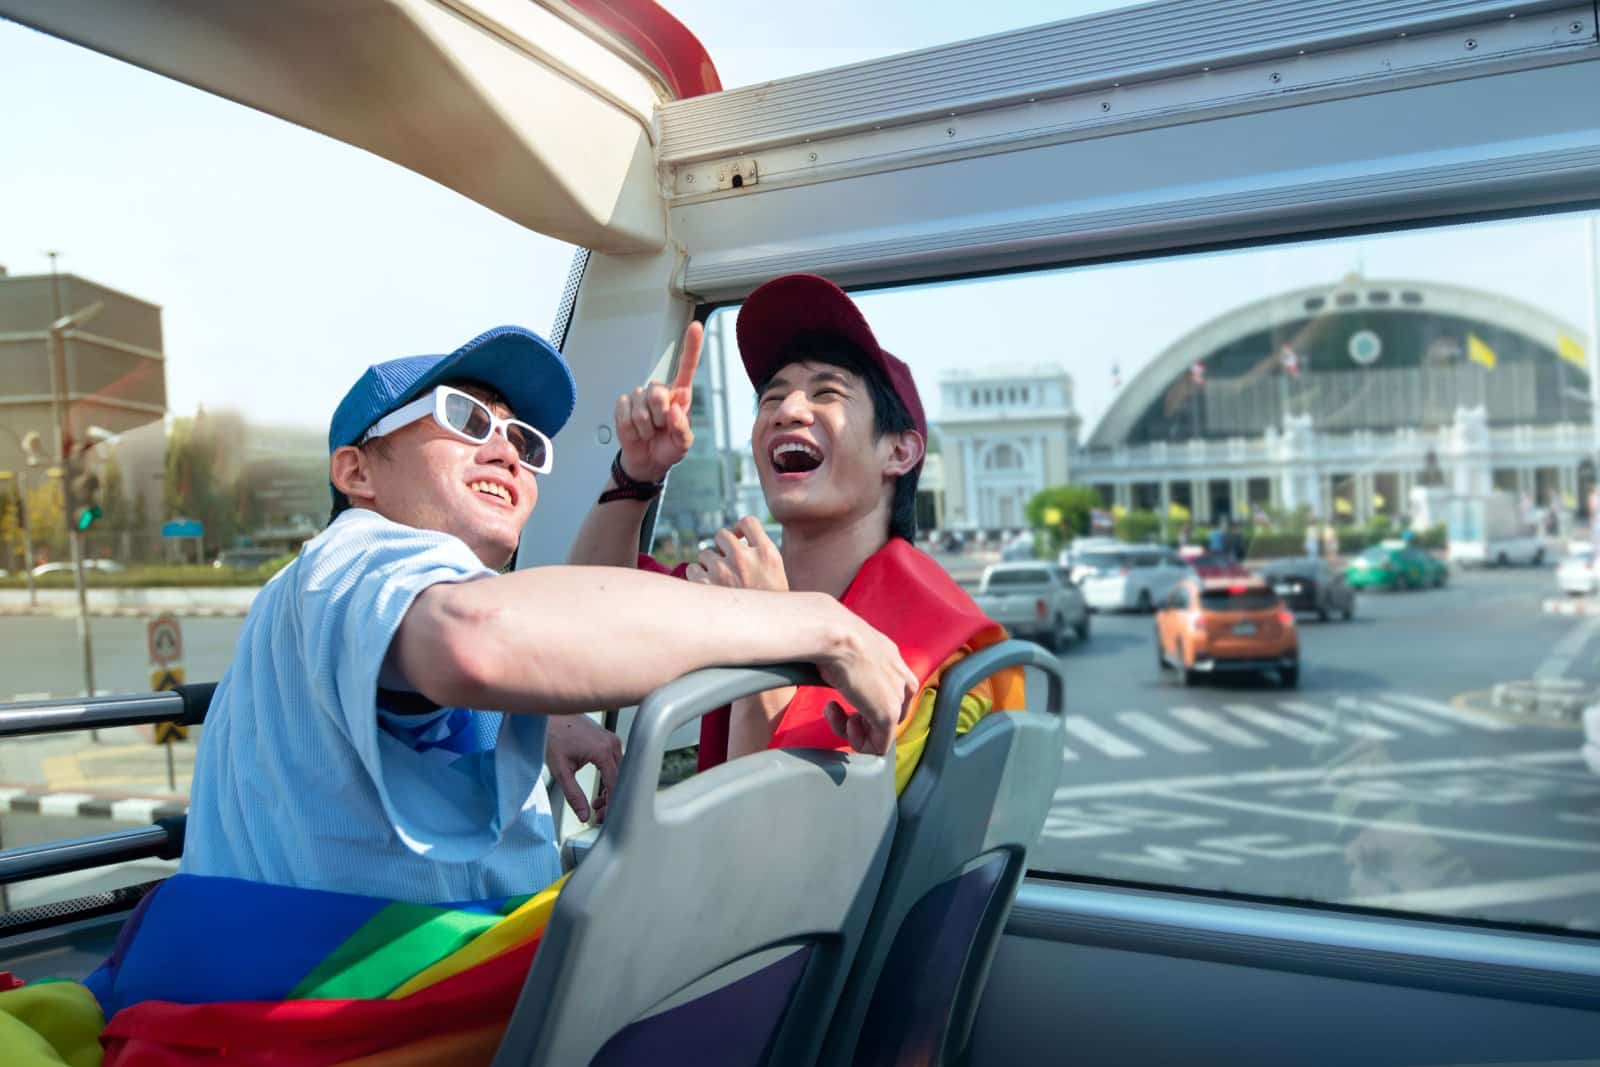 <p><span>Consider joining LGBTQ+ tours or activities, especially in cities known for their inclusive culture. These tours not only offer a chance to explore the destination from an LGBTQ+ perspective but also provide opportunities to meet fellow travelers and share experiences.</span></p> <p><b>Insider’s Tip: </b><span>Look for tour companies that specifically cater to LGBTQ+ travelers and check their reviews for quality and safety standards.</span></p>